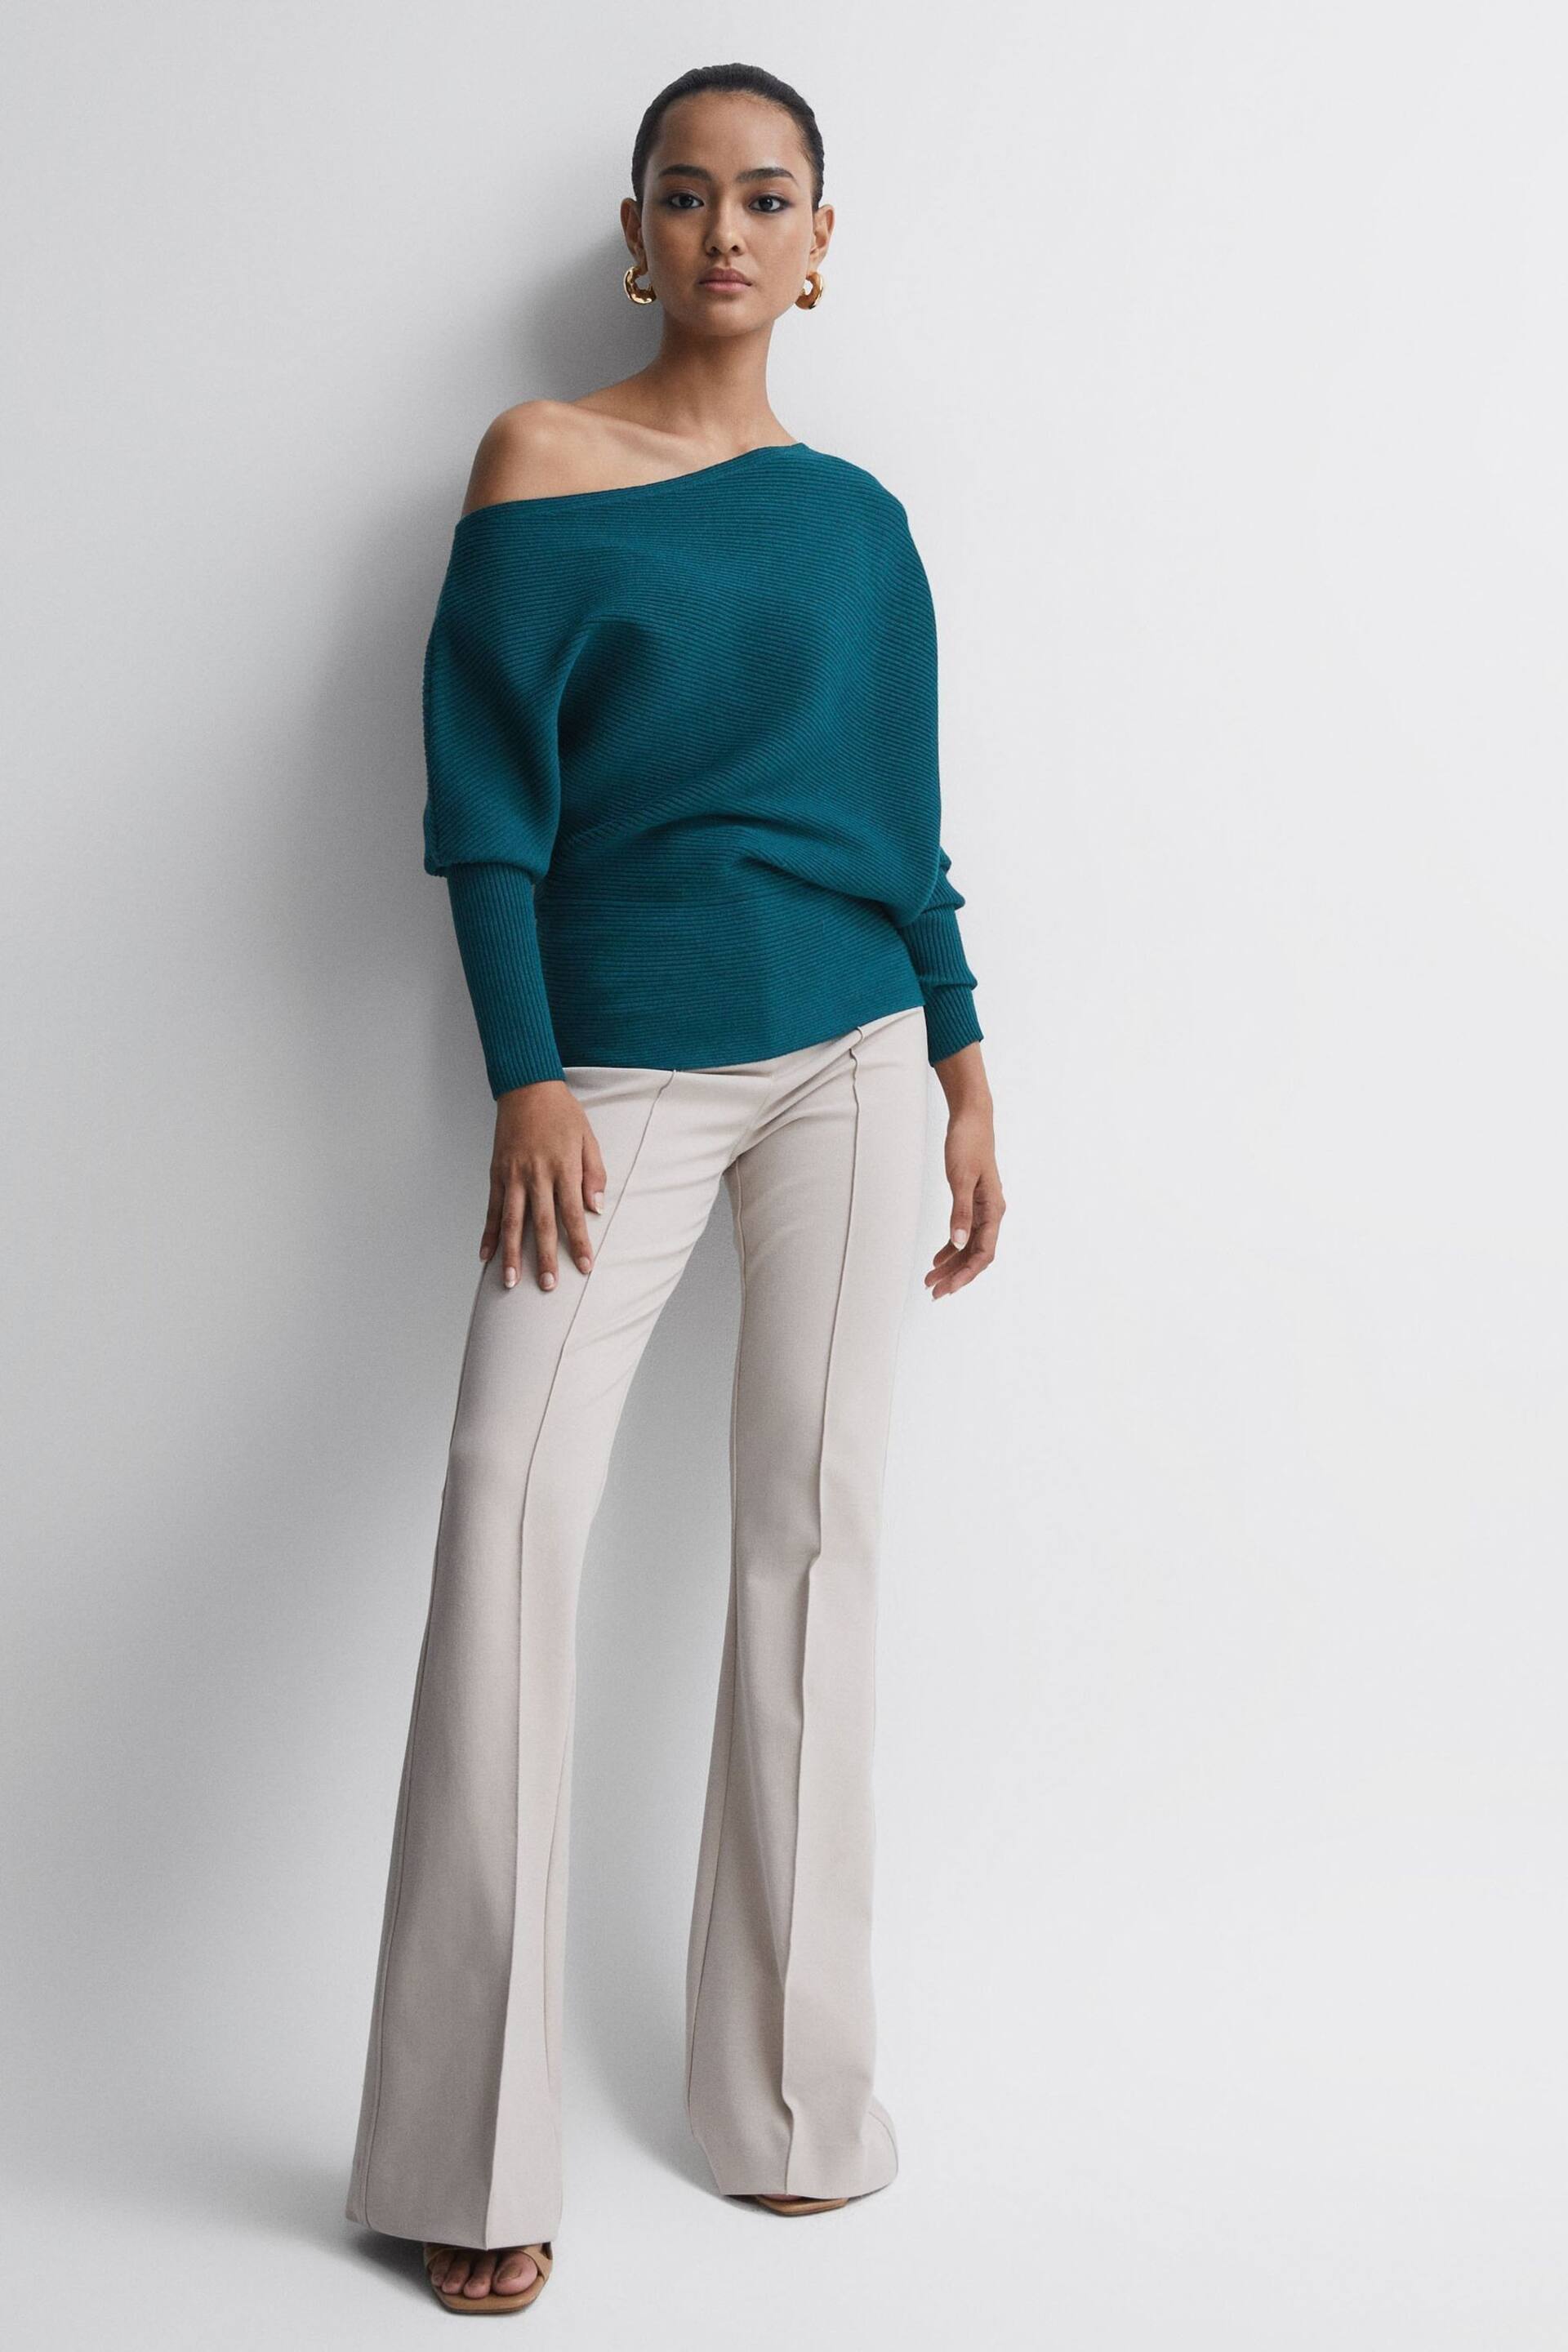 Reiss Teal Lorna Asymmetric Drape Knitted Top - Image 3 of 5